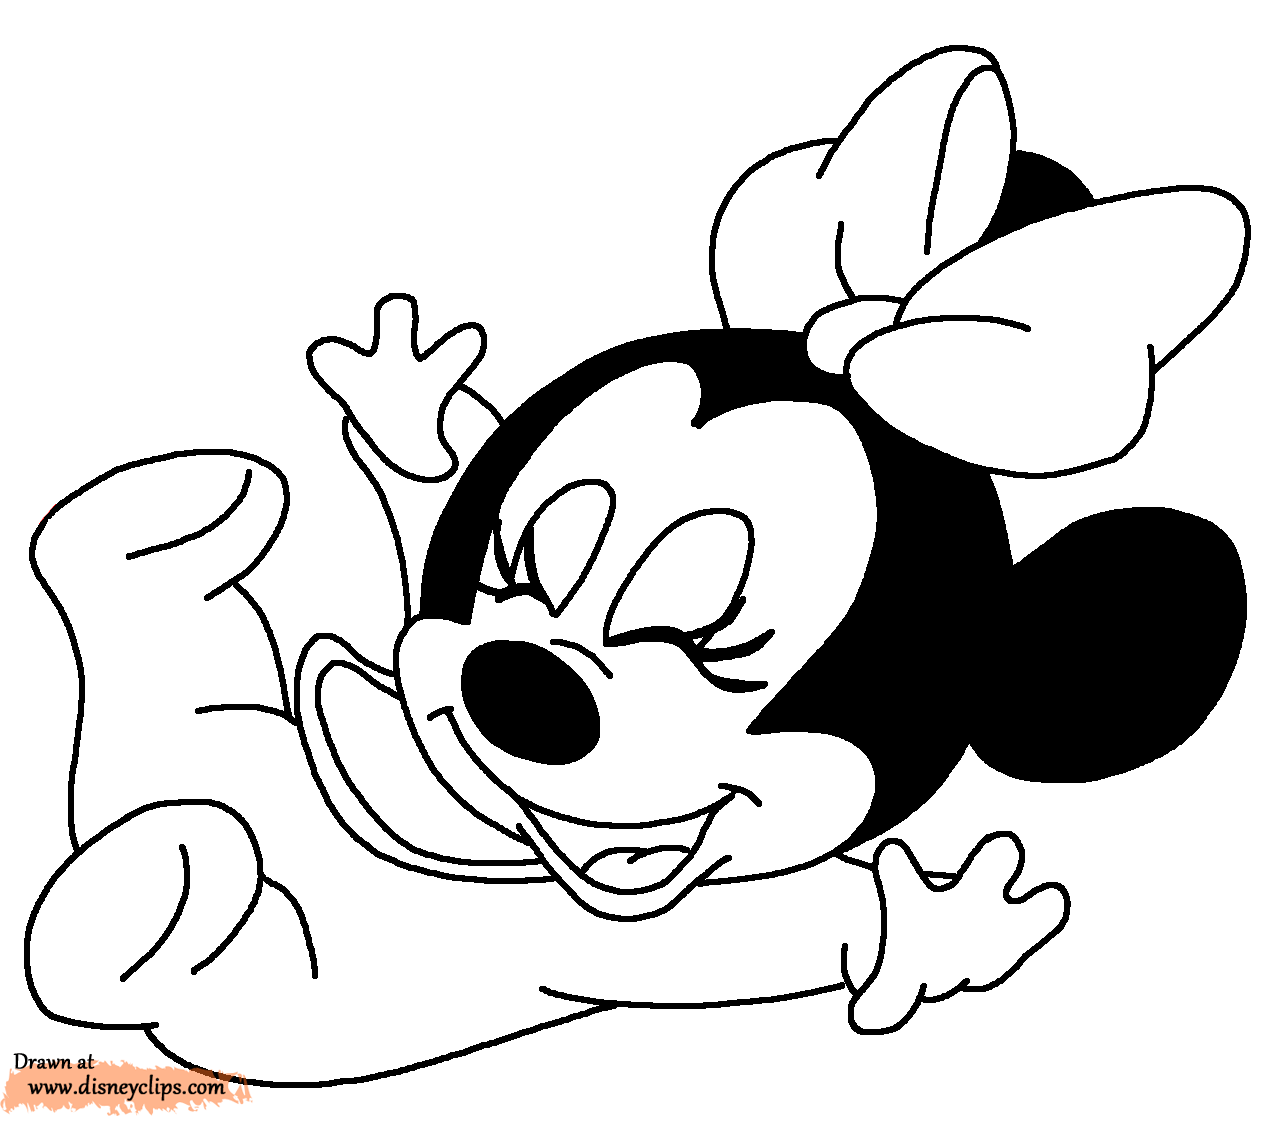 Free Disney Baby Character Coloring Pages   Coloring Home